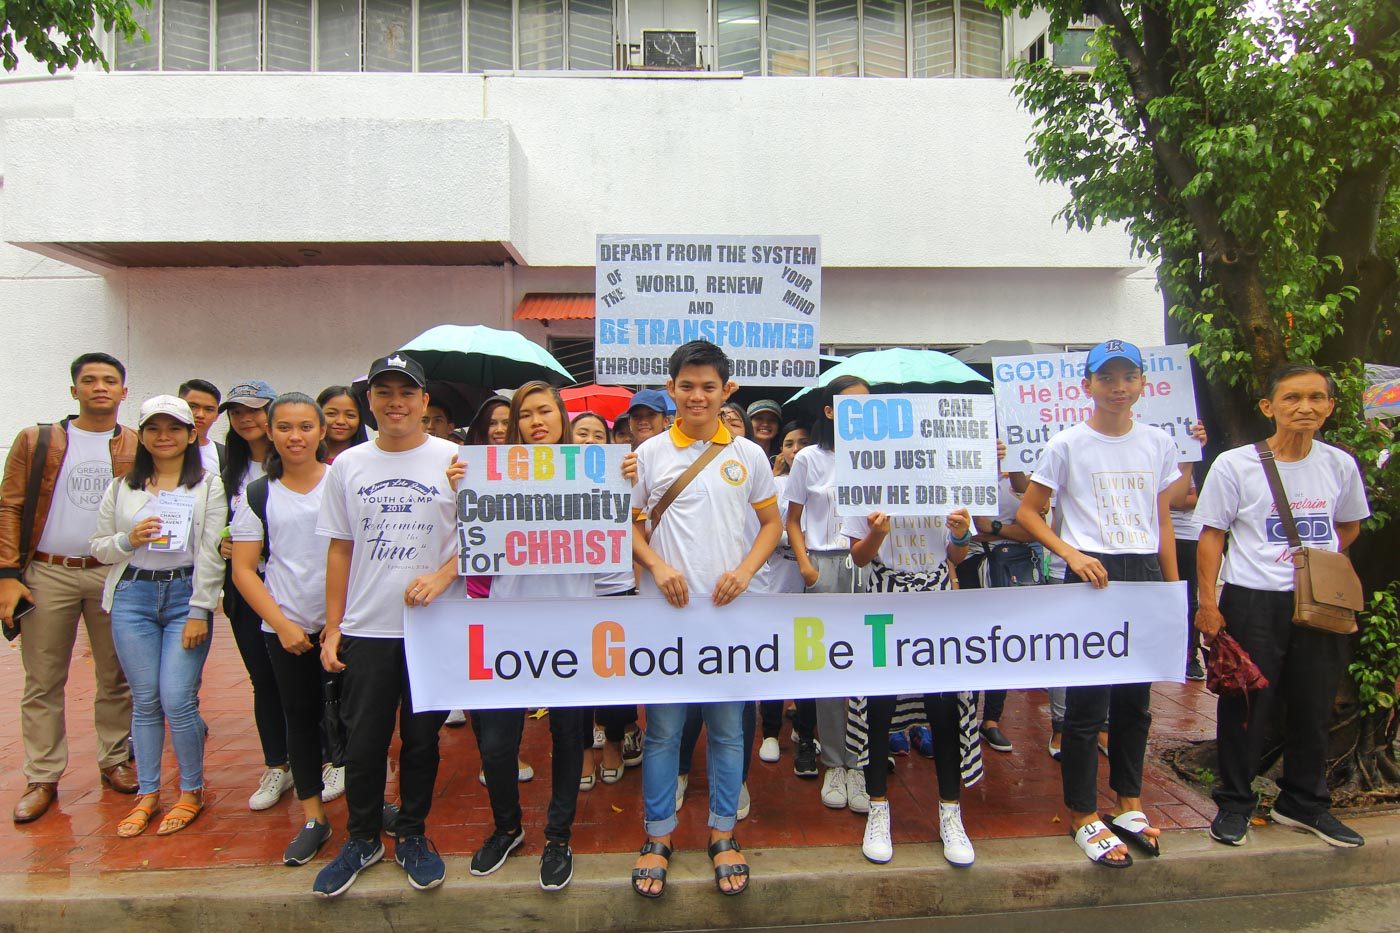 How religious groups clashed over LGBTQ+ rights at Pride 2019